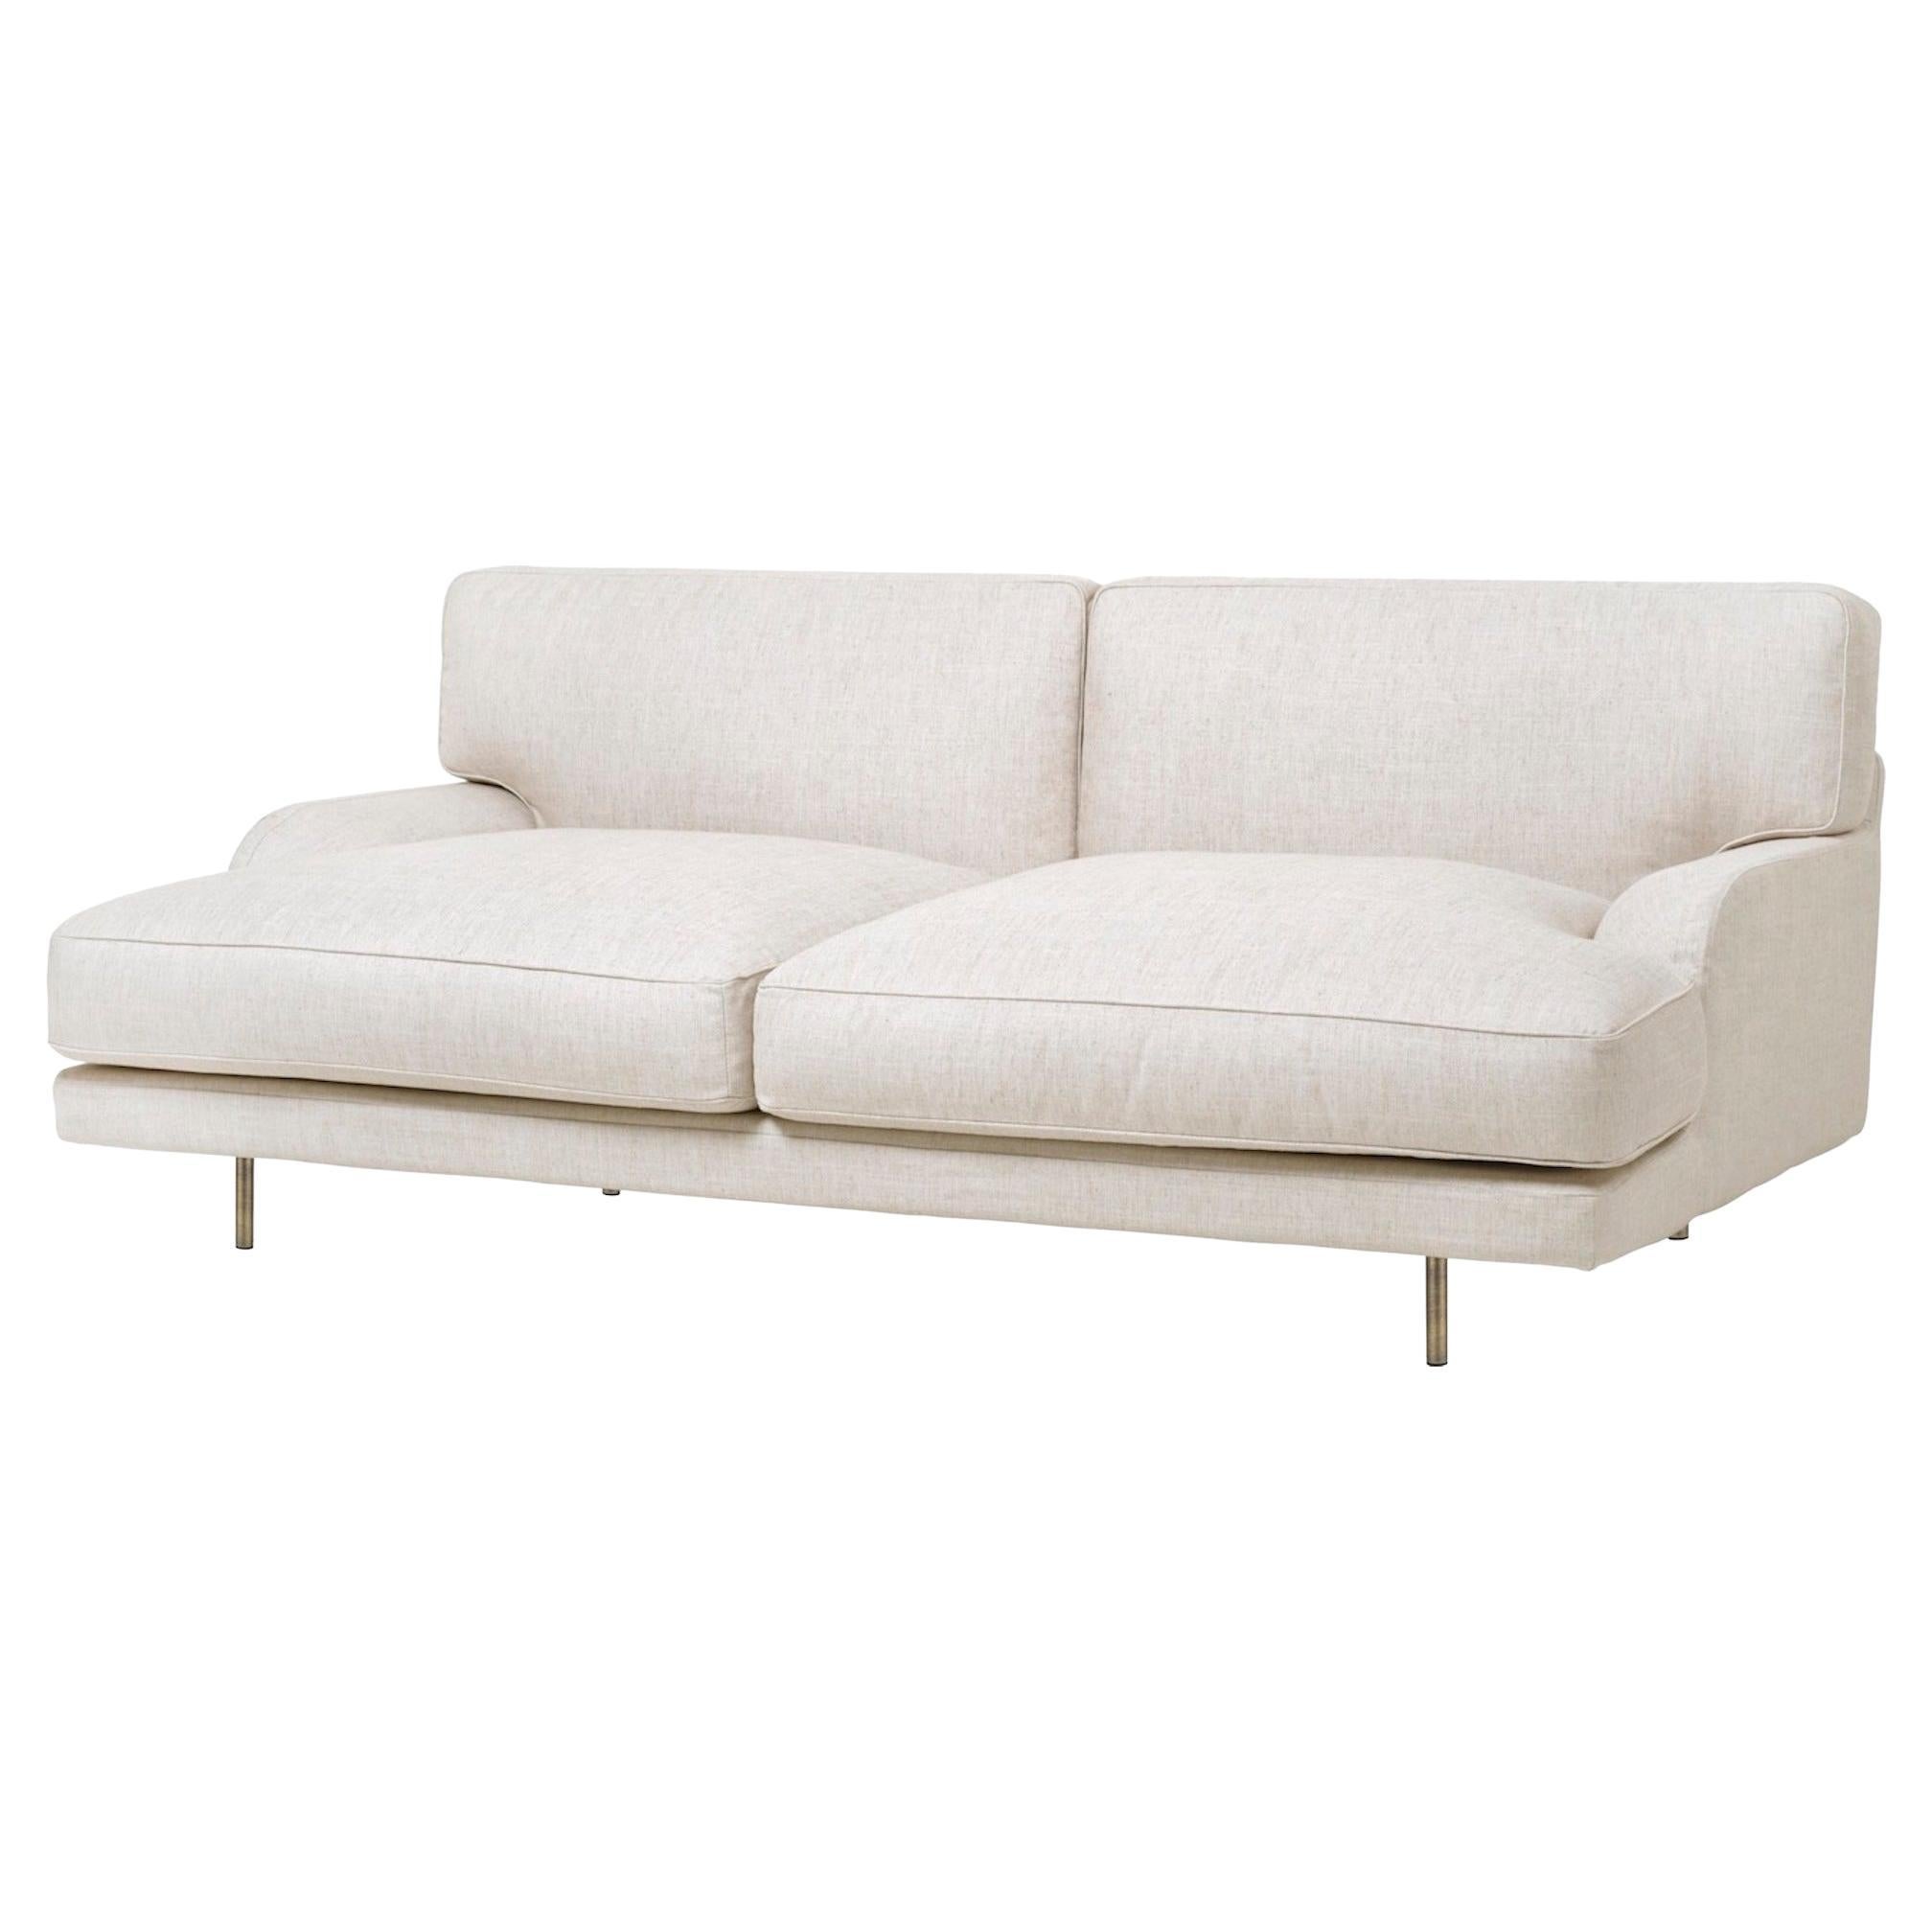 Customizable Gubi Flaneur Module, Chaise Longue with Righ Designed by Gamfratesi For Sale 10